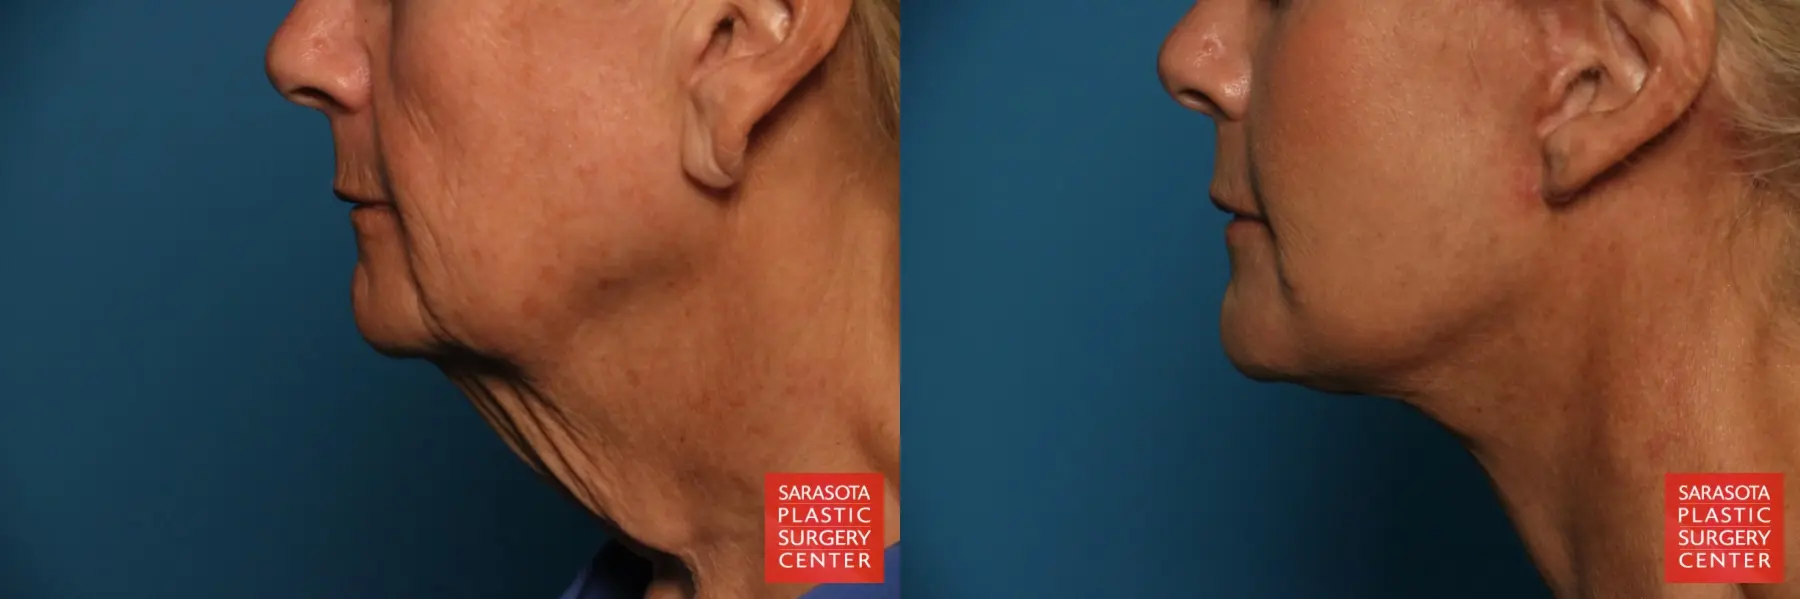 Otoplasty And Earlobe Repair: Patient 5 - Before and After  